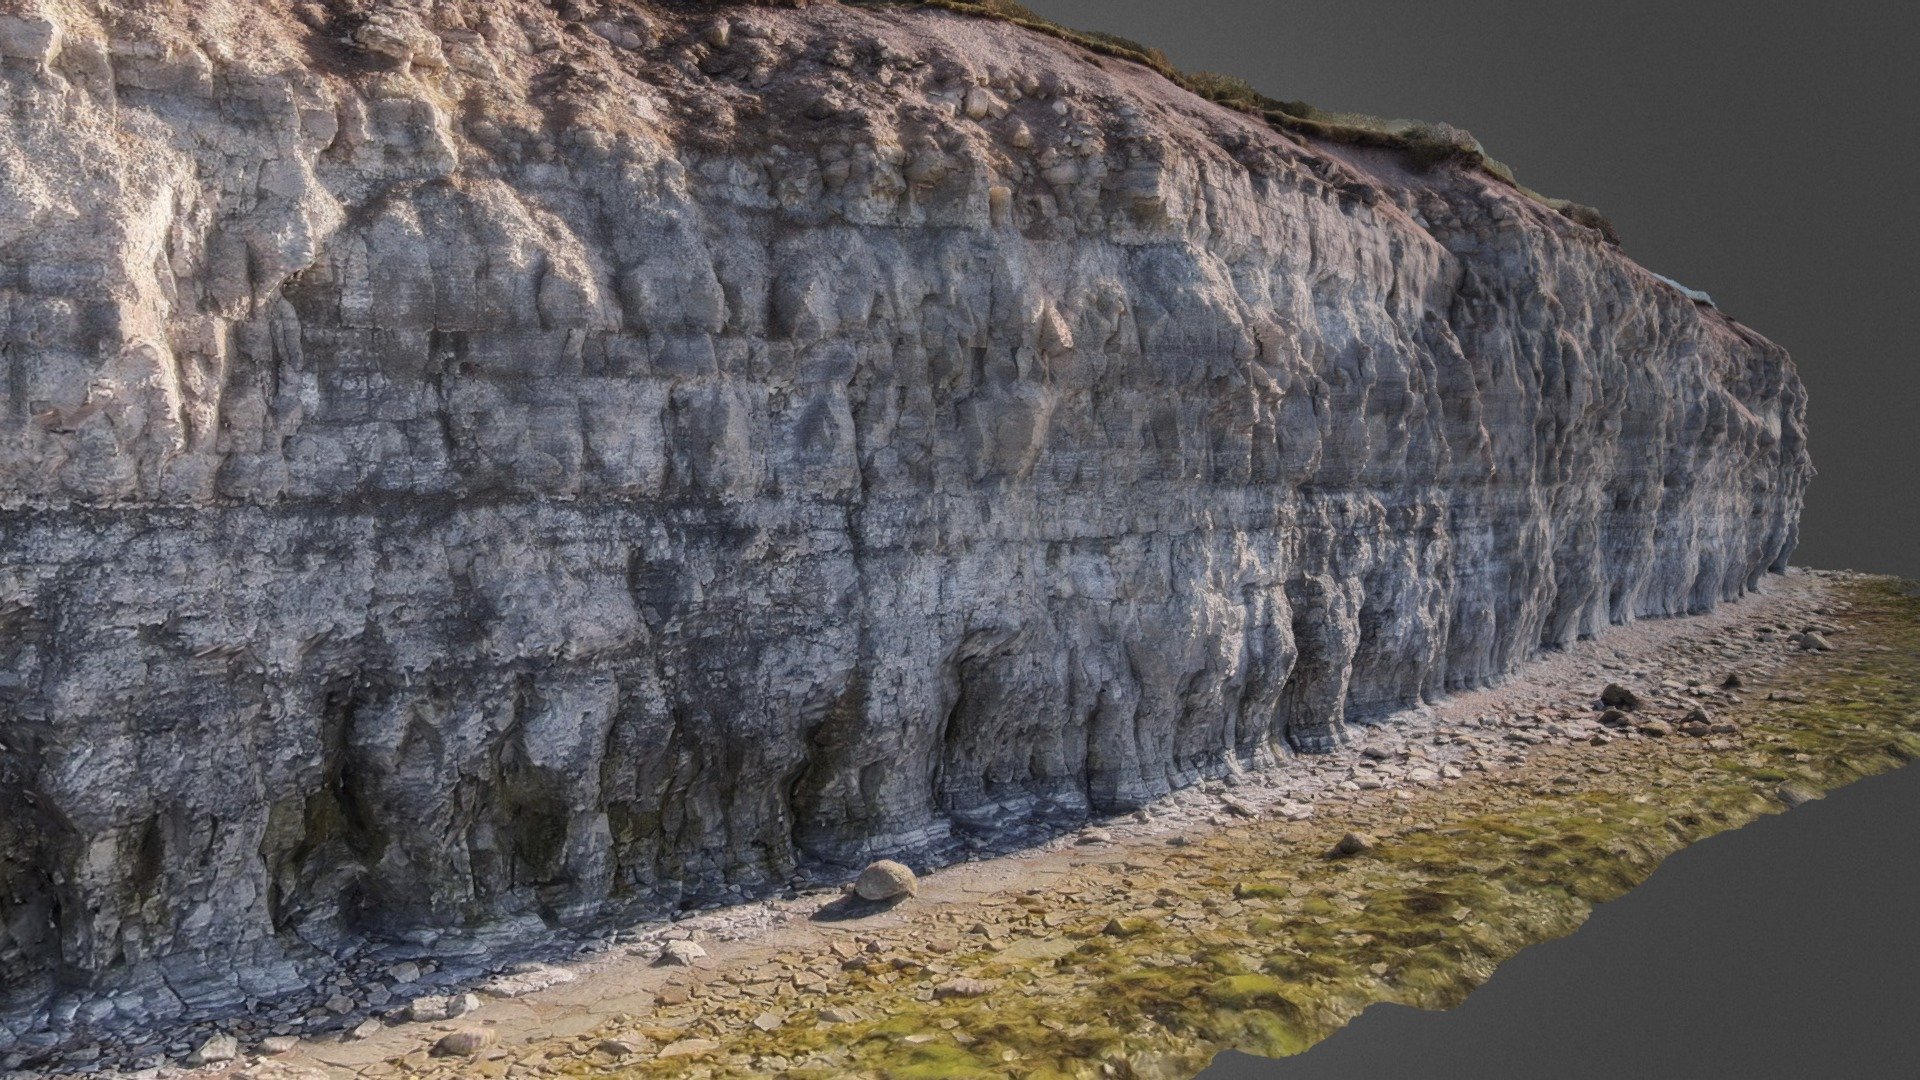 Section of the Panga cliff that is the highest cliff in Saaremaa Island, Estonia. Its composed of Silurian dolo- and limestones (Jaagarahu and Jaani Stage). Max height is 16.5 meters, length of the model being around 300 m.

Compiled from 145 drone photos.
English description of Estonian Silurian cliffs here: http://www.gi.ee/geoturism/SaarePangad_ENG_100dpiS.pdf - Panga Pank: Silurian Lime- And Dolostone Cliff - 3D model by Marko Kohv (@markokohv) 3d model